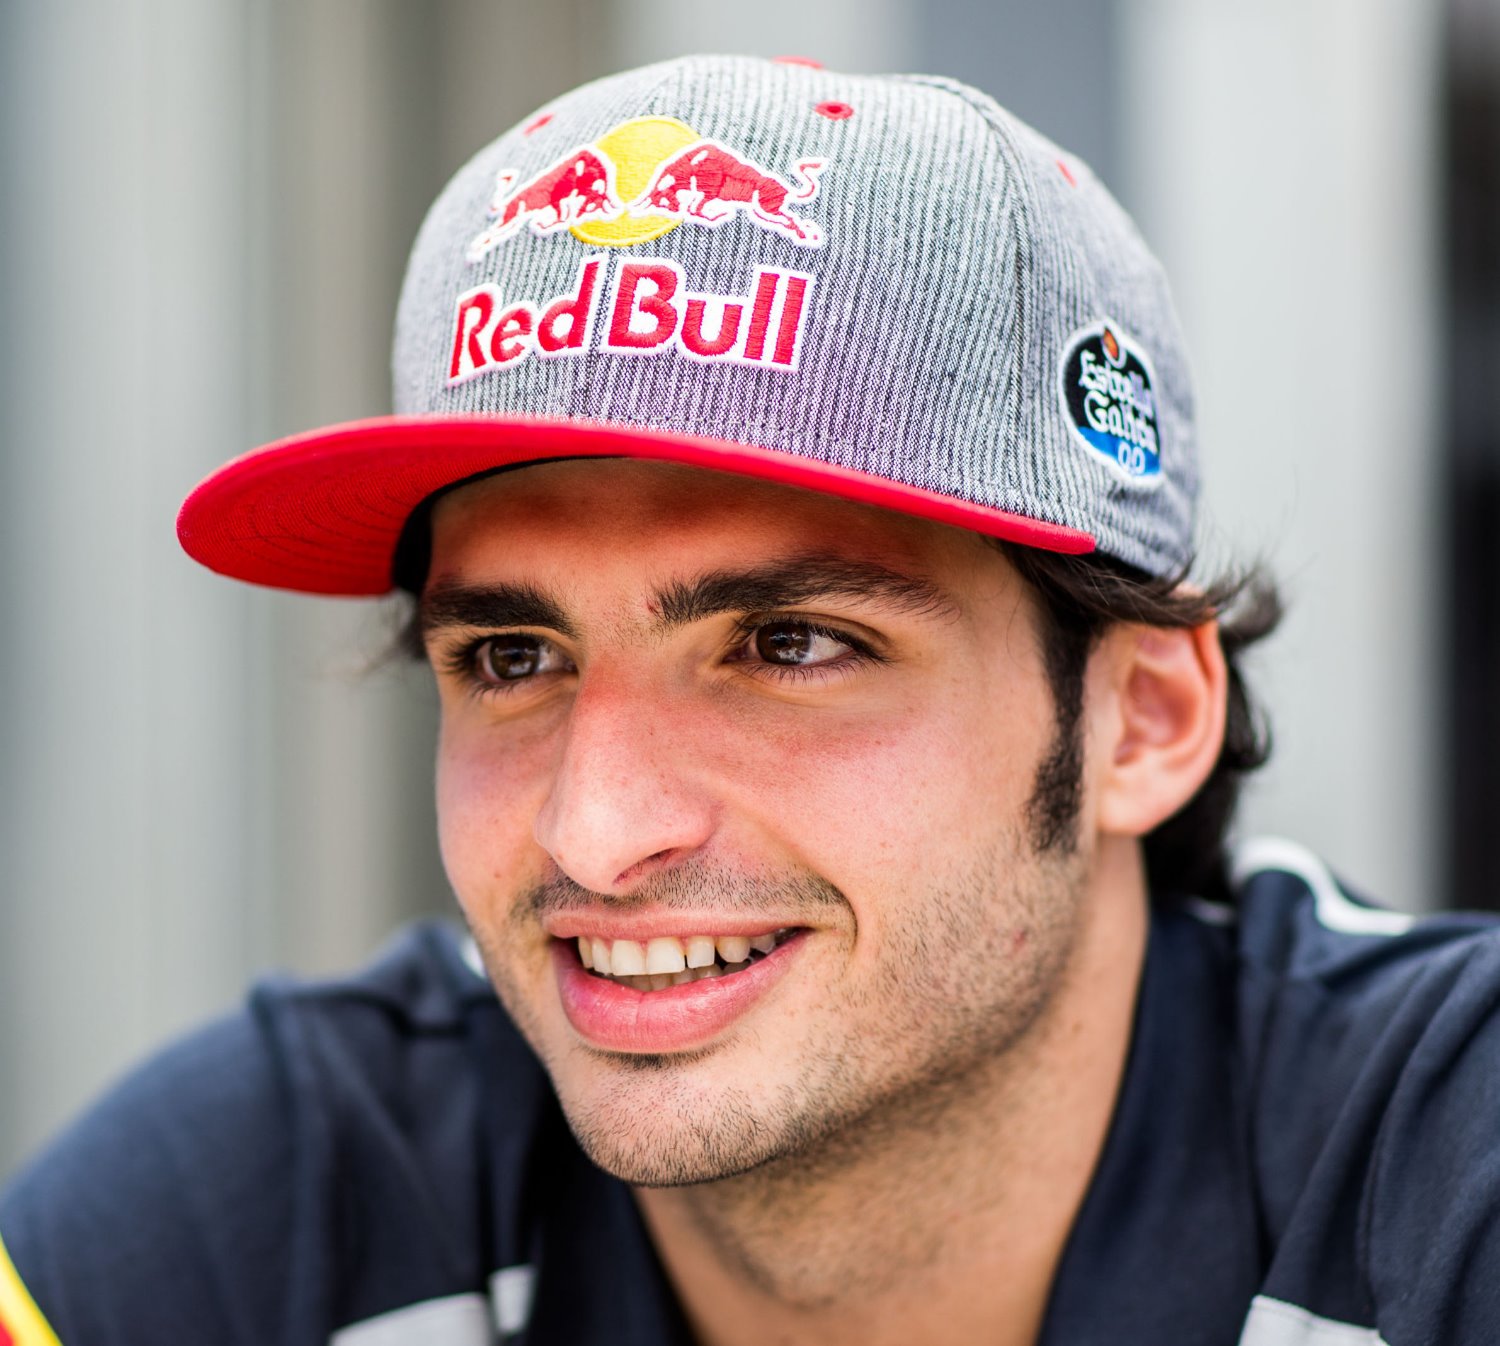 Sainz Jr has no where to go within Red Bull